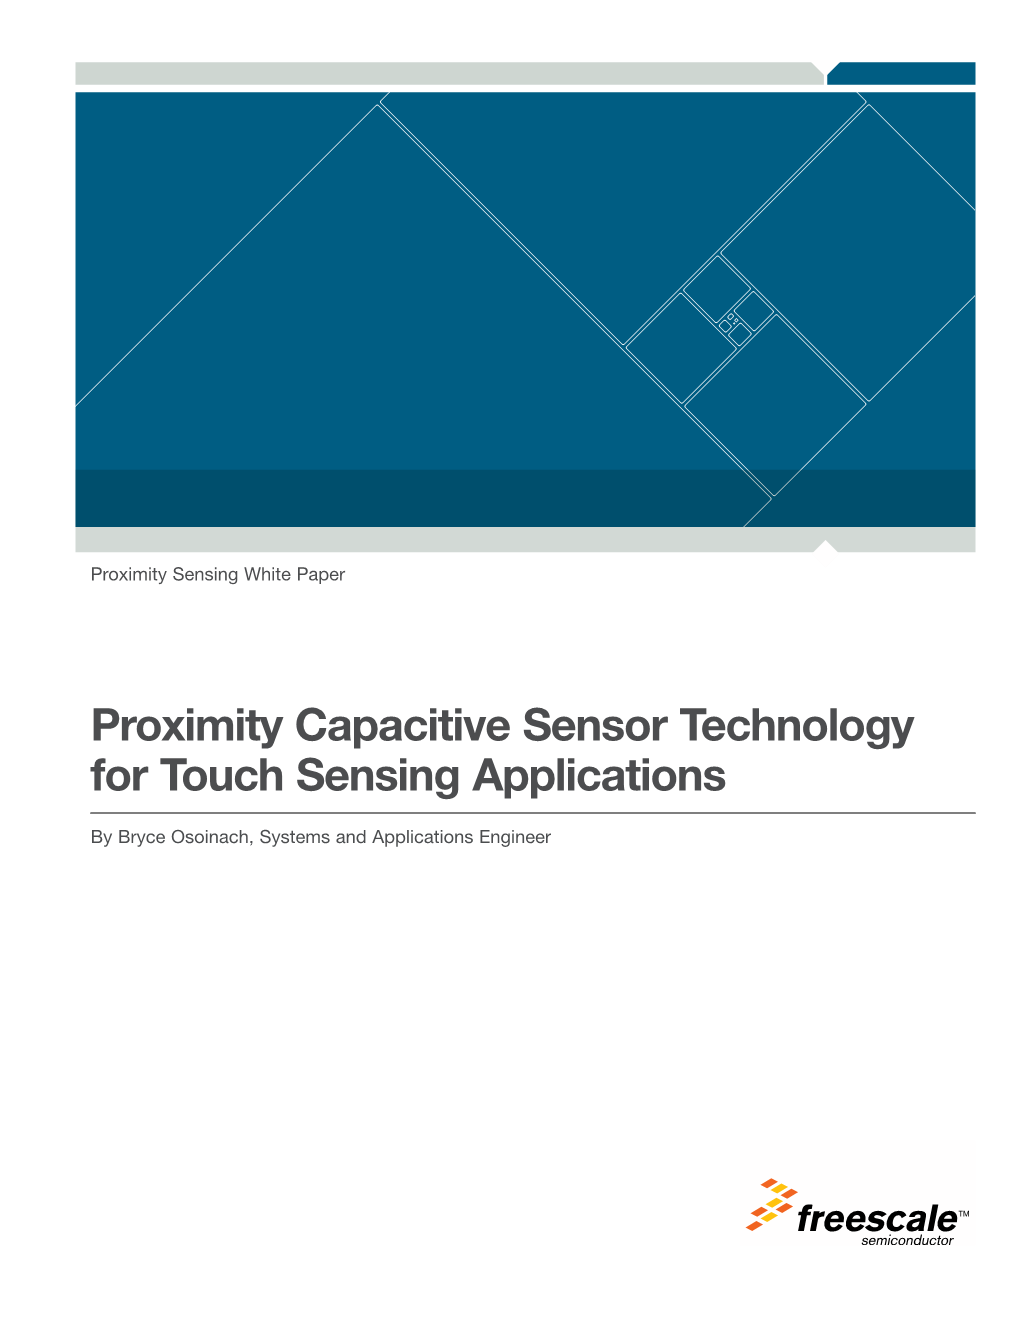 Proximity Capacitive Sensor Technology for Touch Sensing Applications